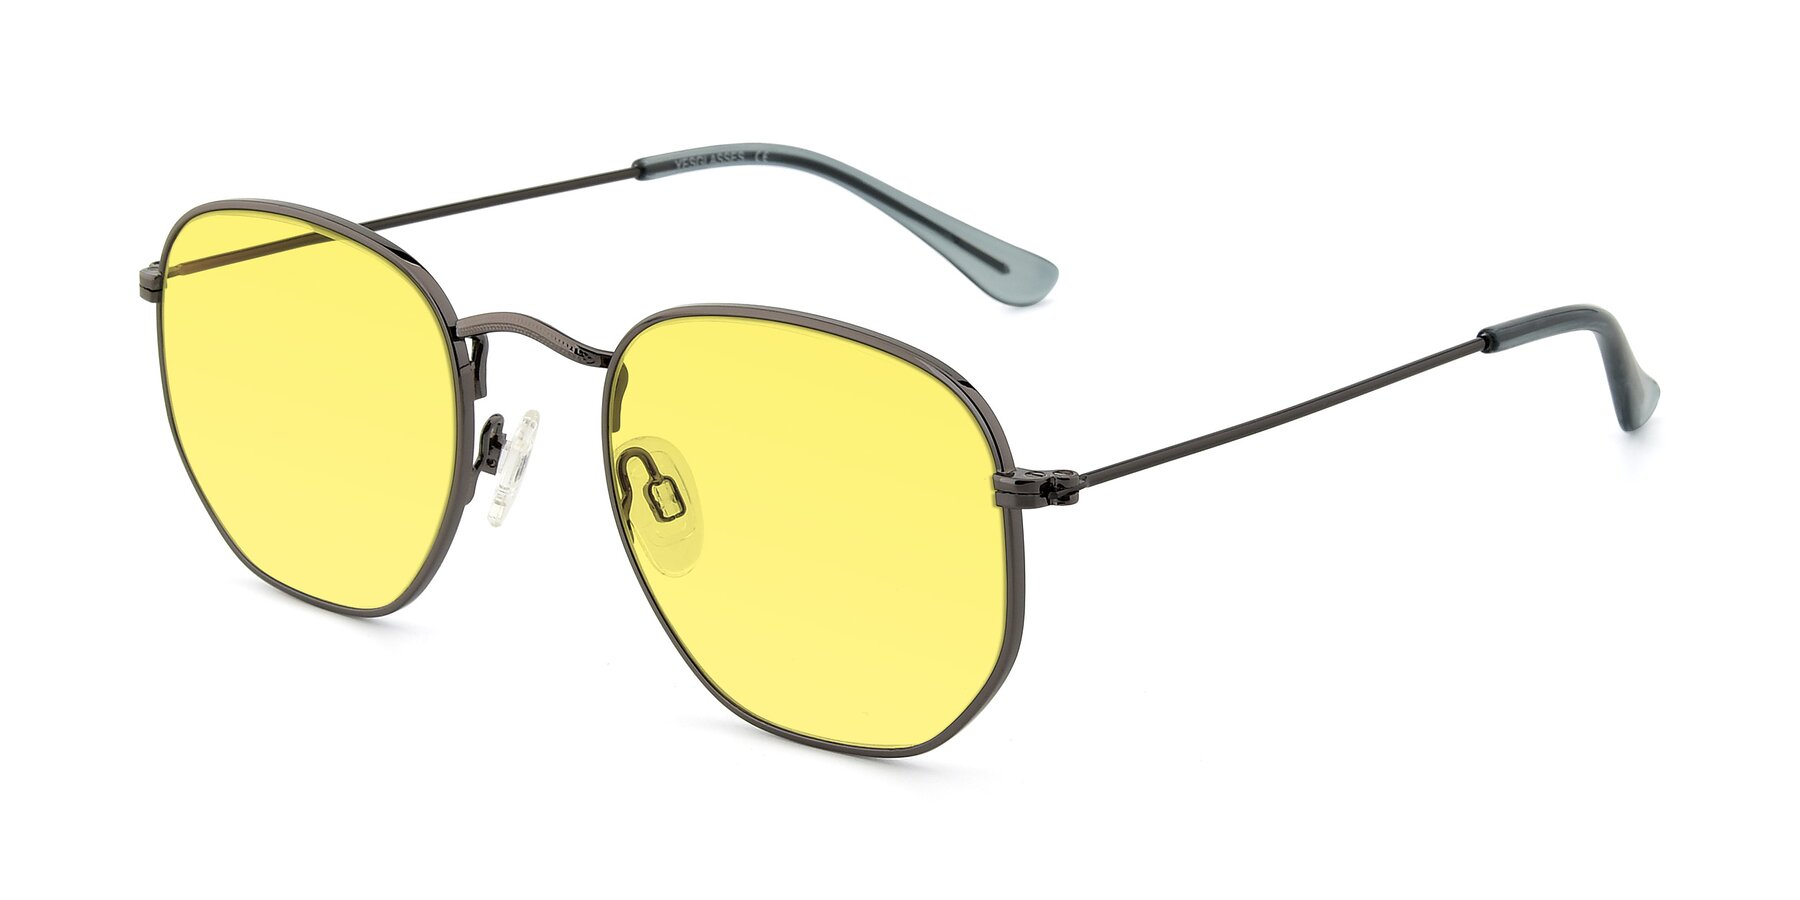 Angle of SSR1944 in Grey with Medium Yellow Tinted Lenses